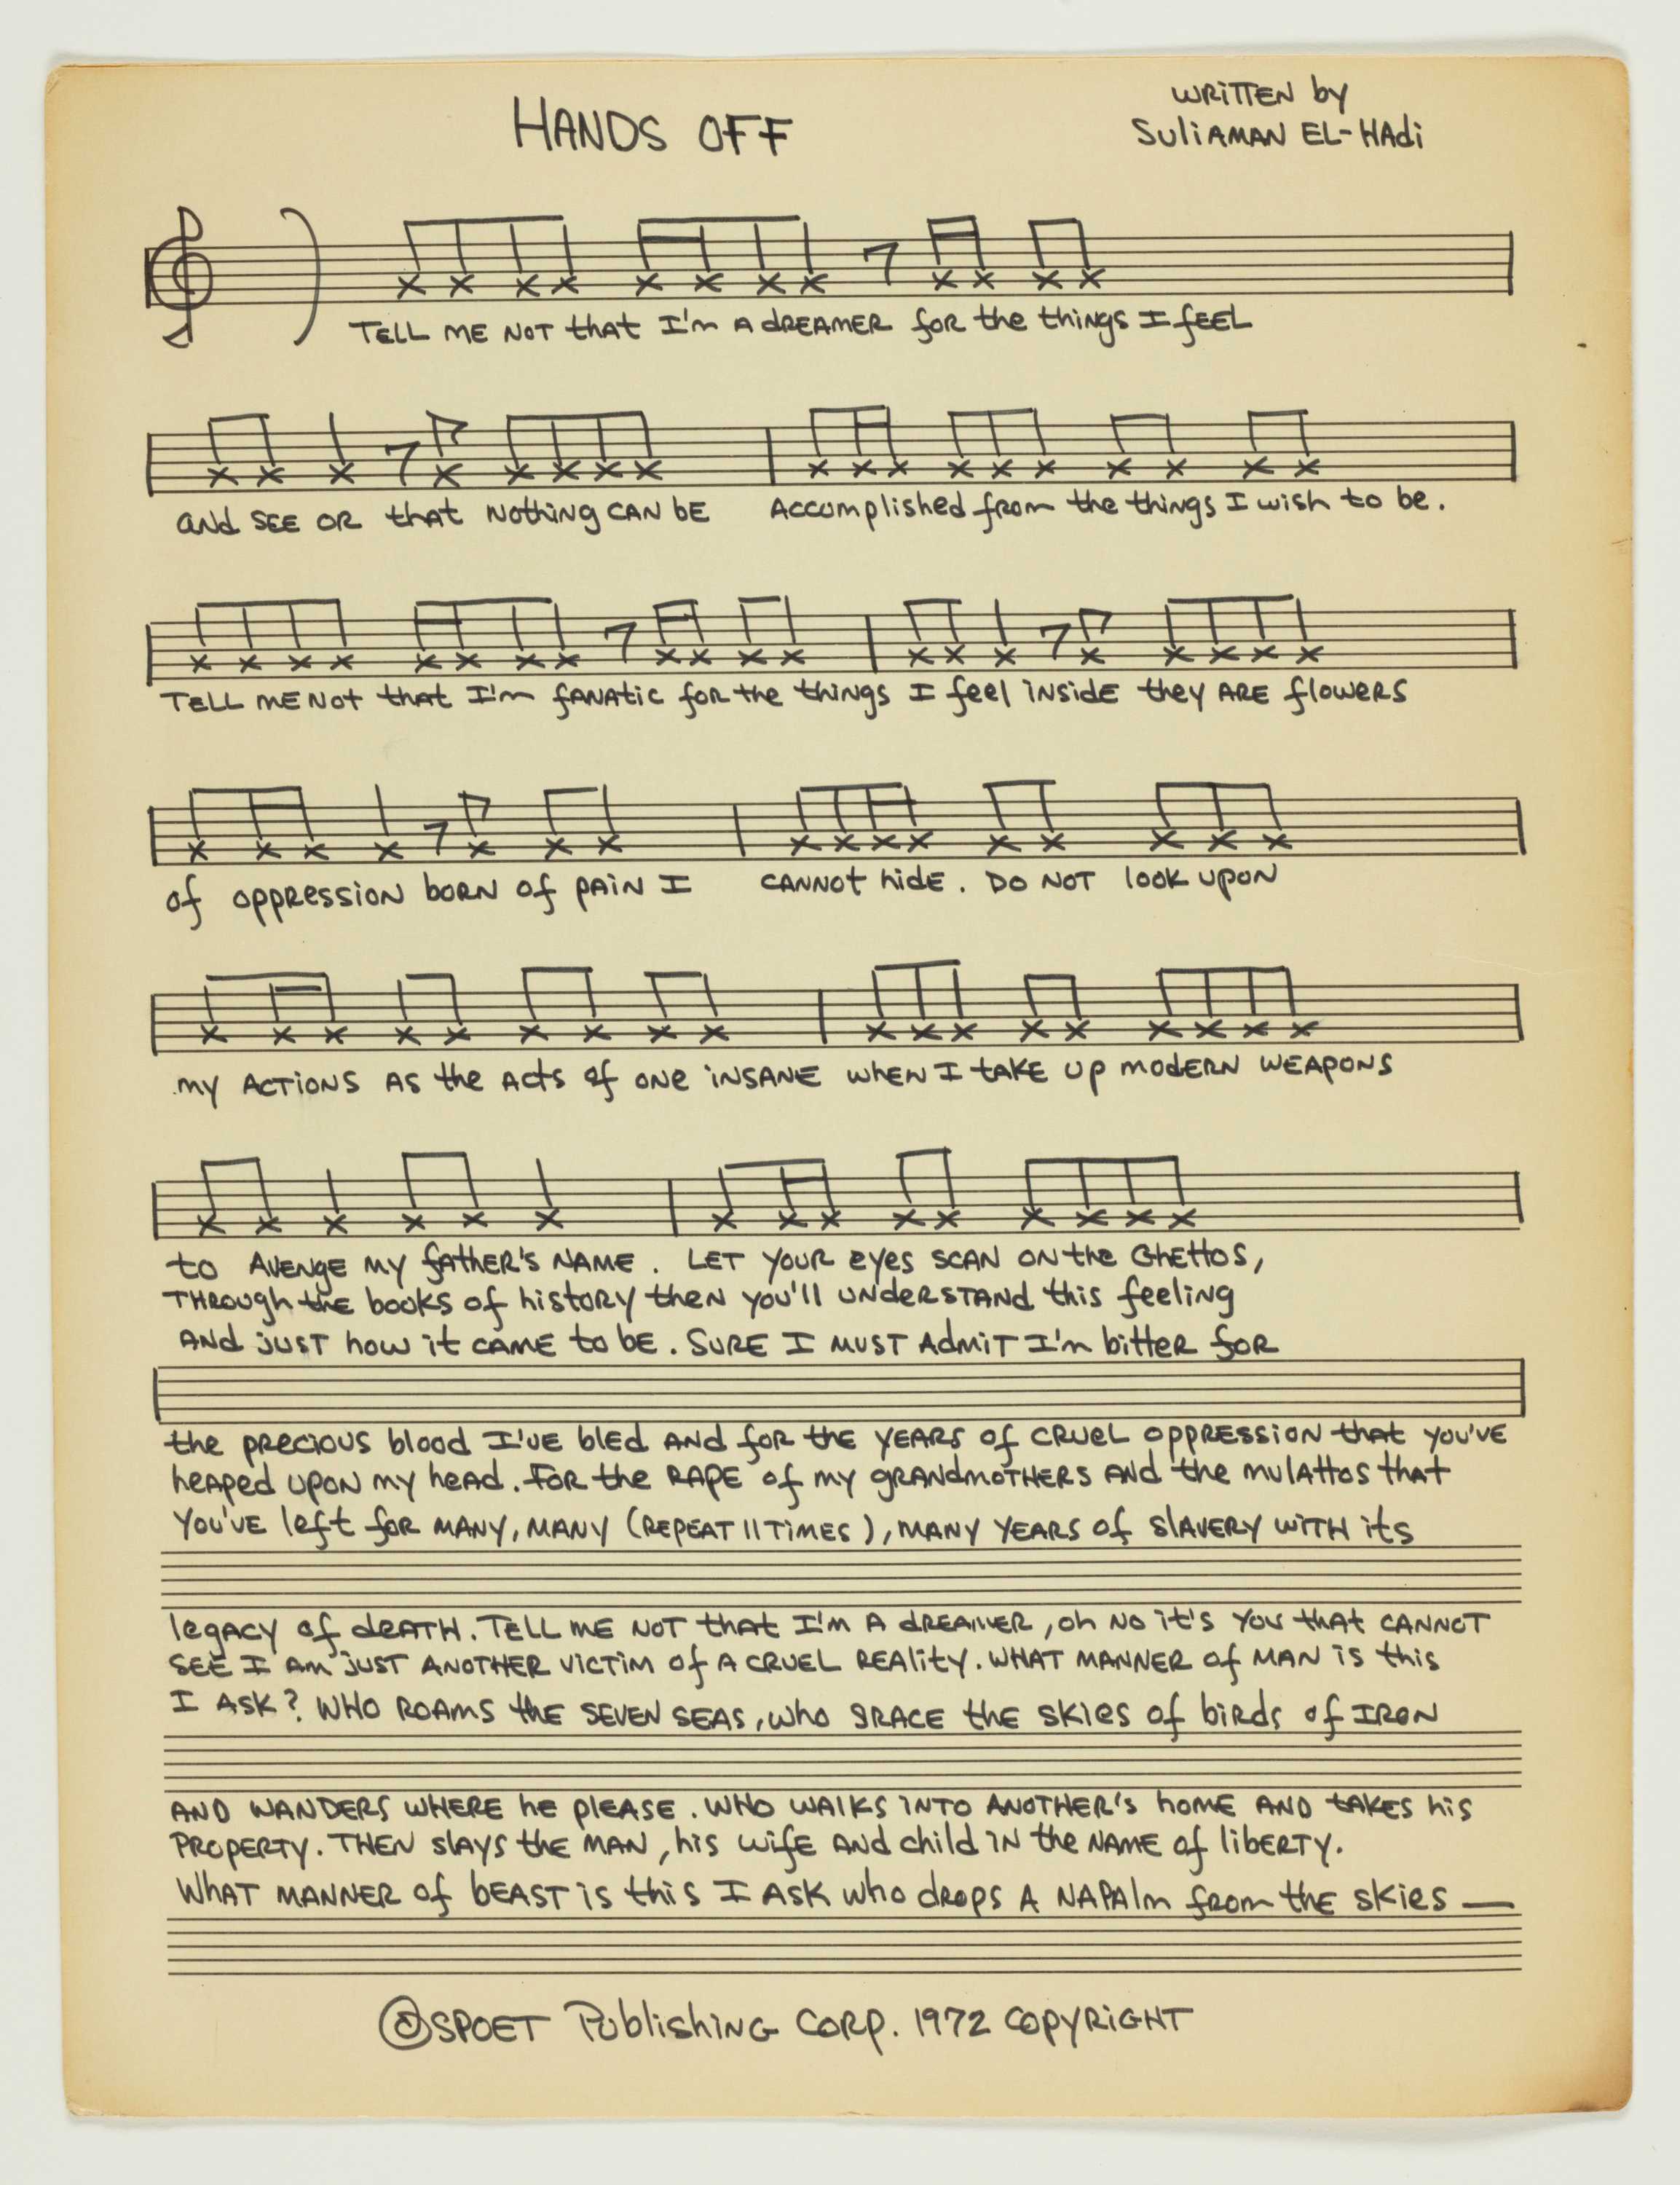 Image of Sheet music for “Hands Off” written by Sulaiman El-Hadi